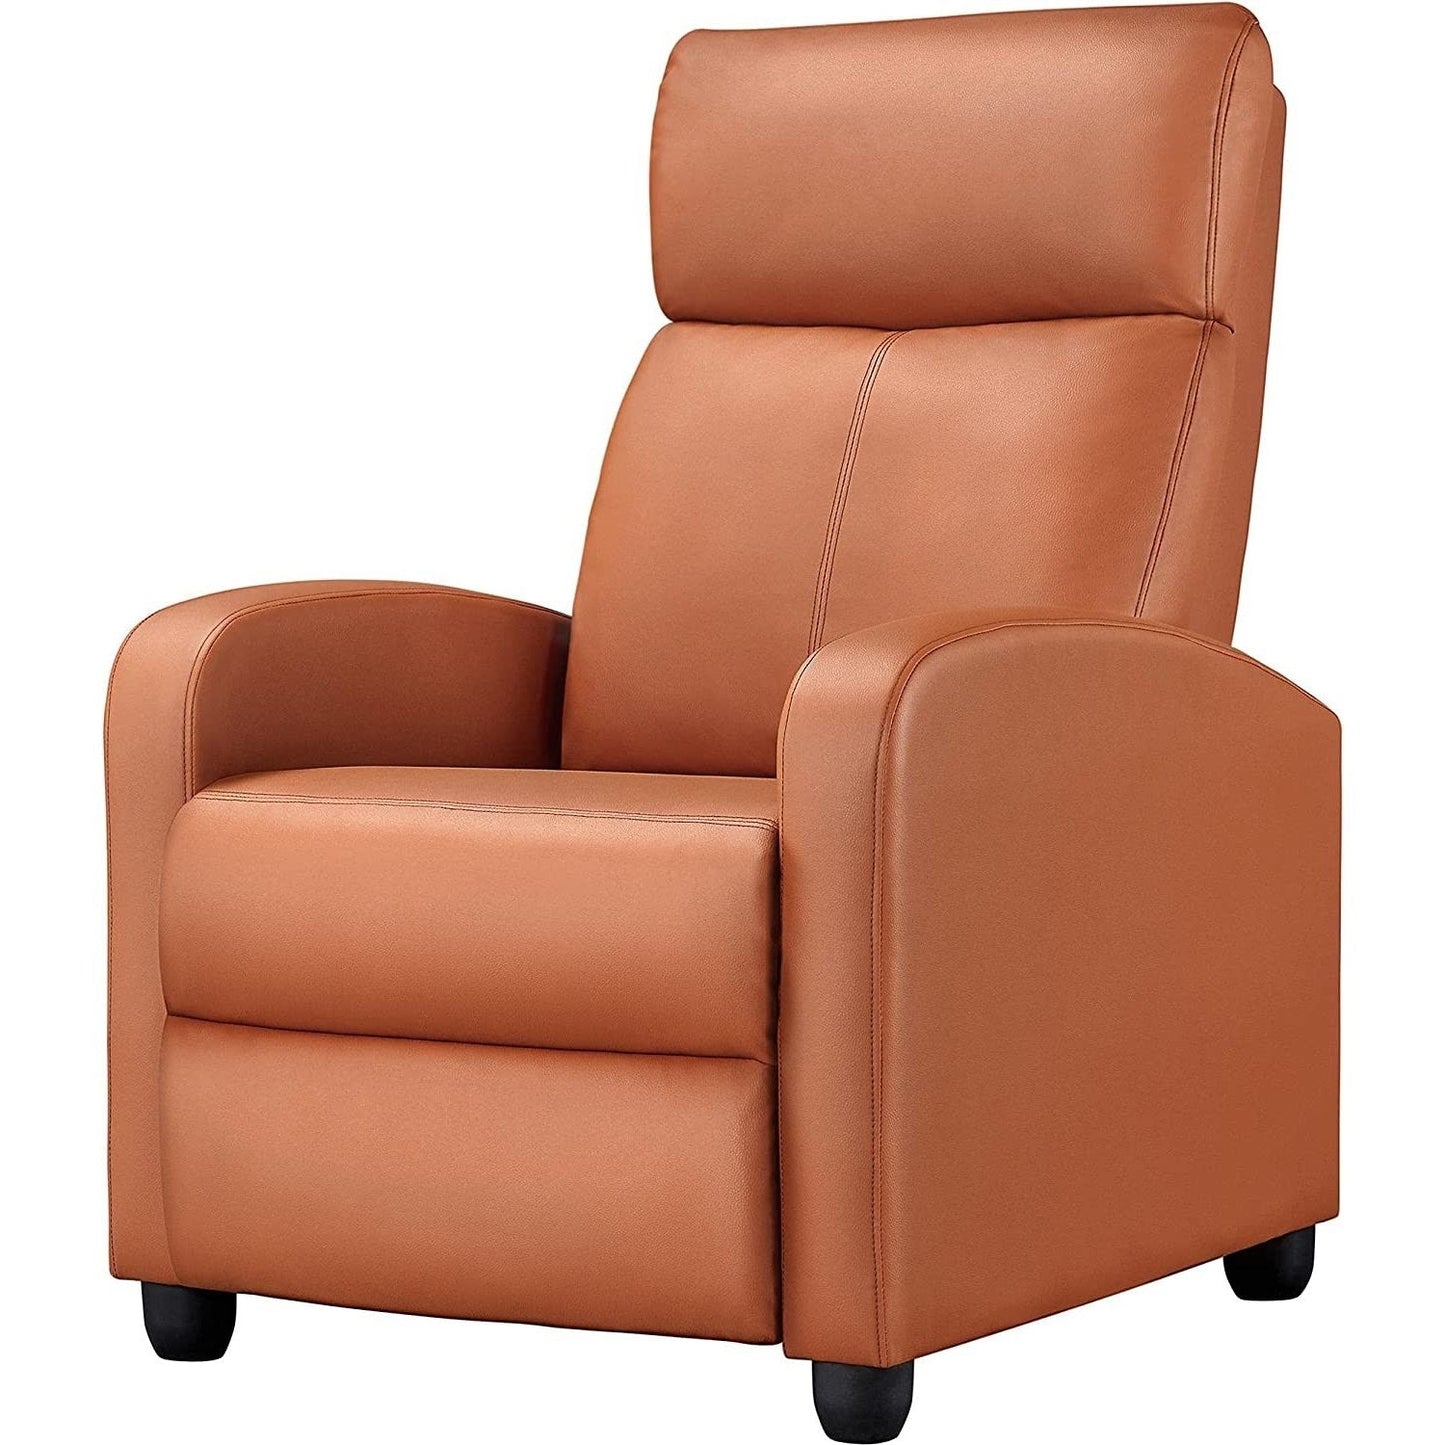 Living Room > Recliners And Chaise Lounge - Brown High-Density Faux Leather Push Back Recliner Chair